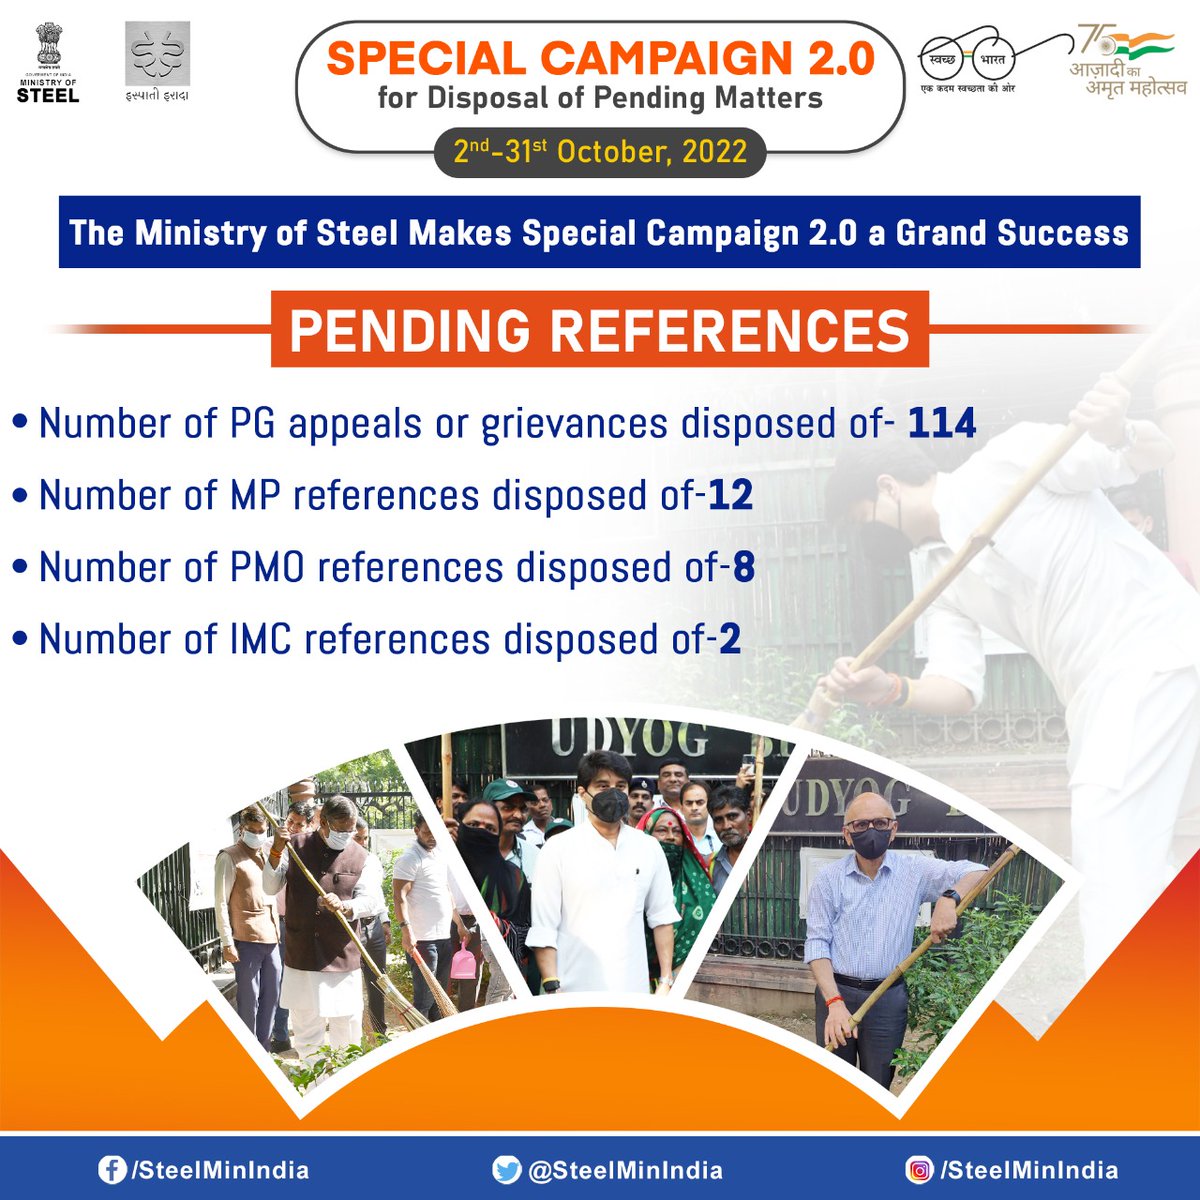 Ministry of Steel along with 7 CPSEs @SAILsteel @nmdclimited @RINL_VSP @MOIL_LIMITED @KIOCLLimited @MECONLimited @mstcindia actively participated in #SpecialCampaign2.0 held on 2nd-31st October 2022, led by Steel Minister, Minister of State for Steel and Secretary (Steel).